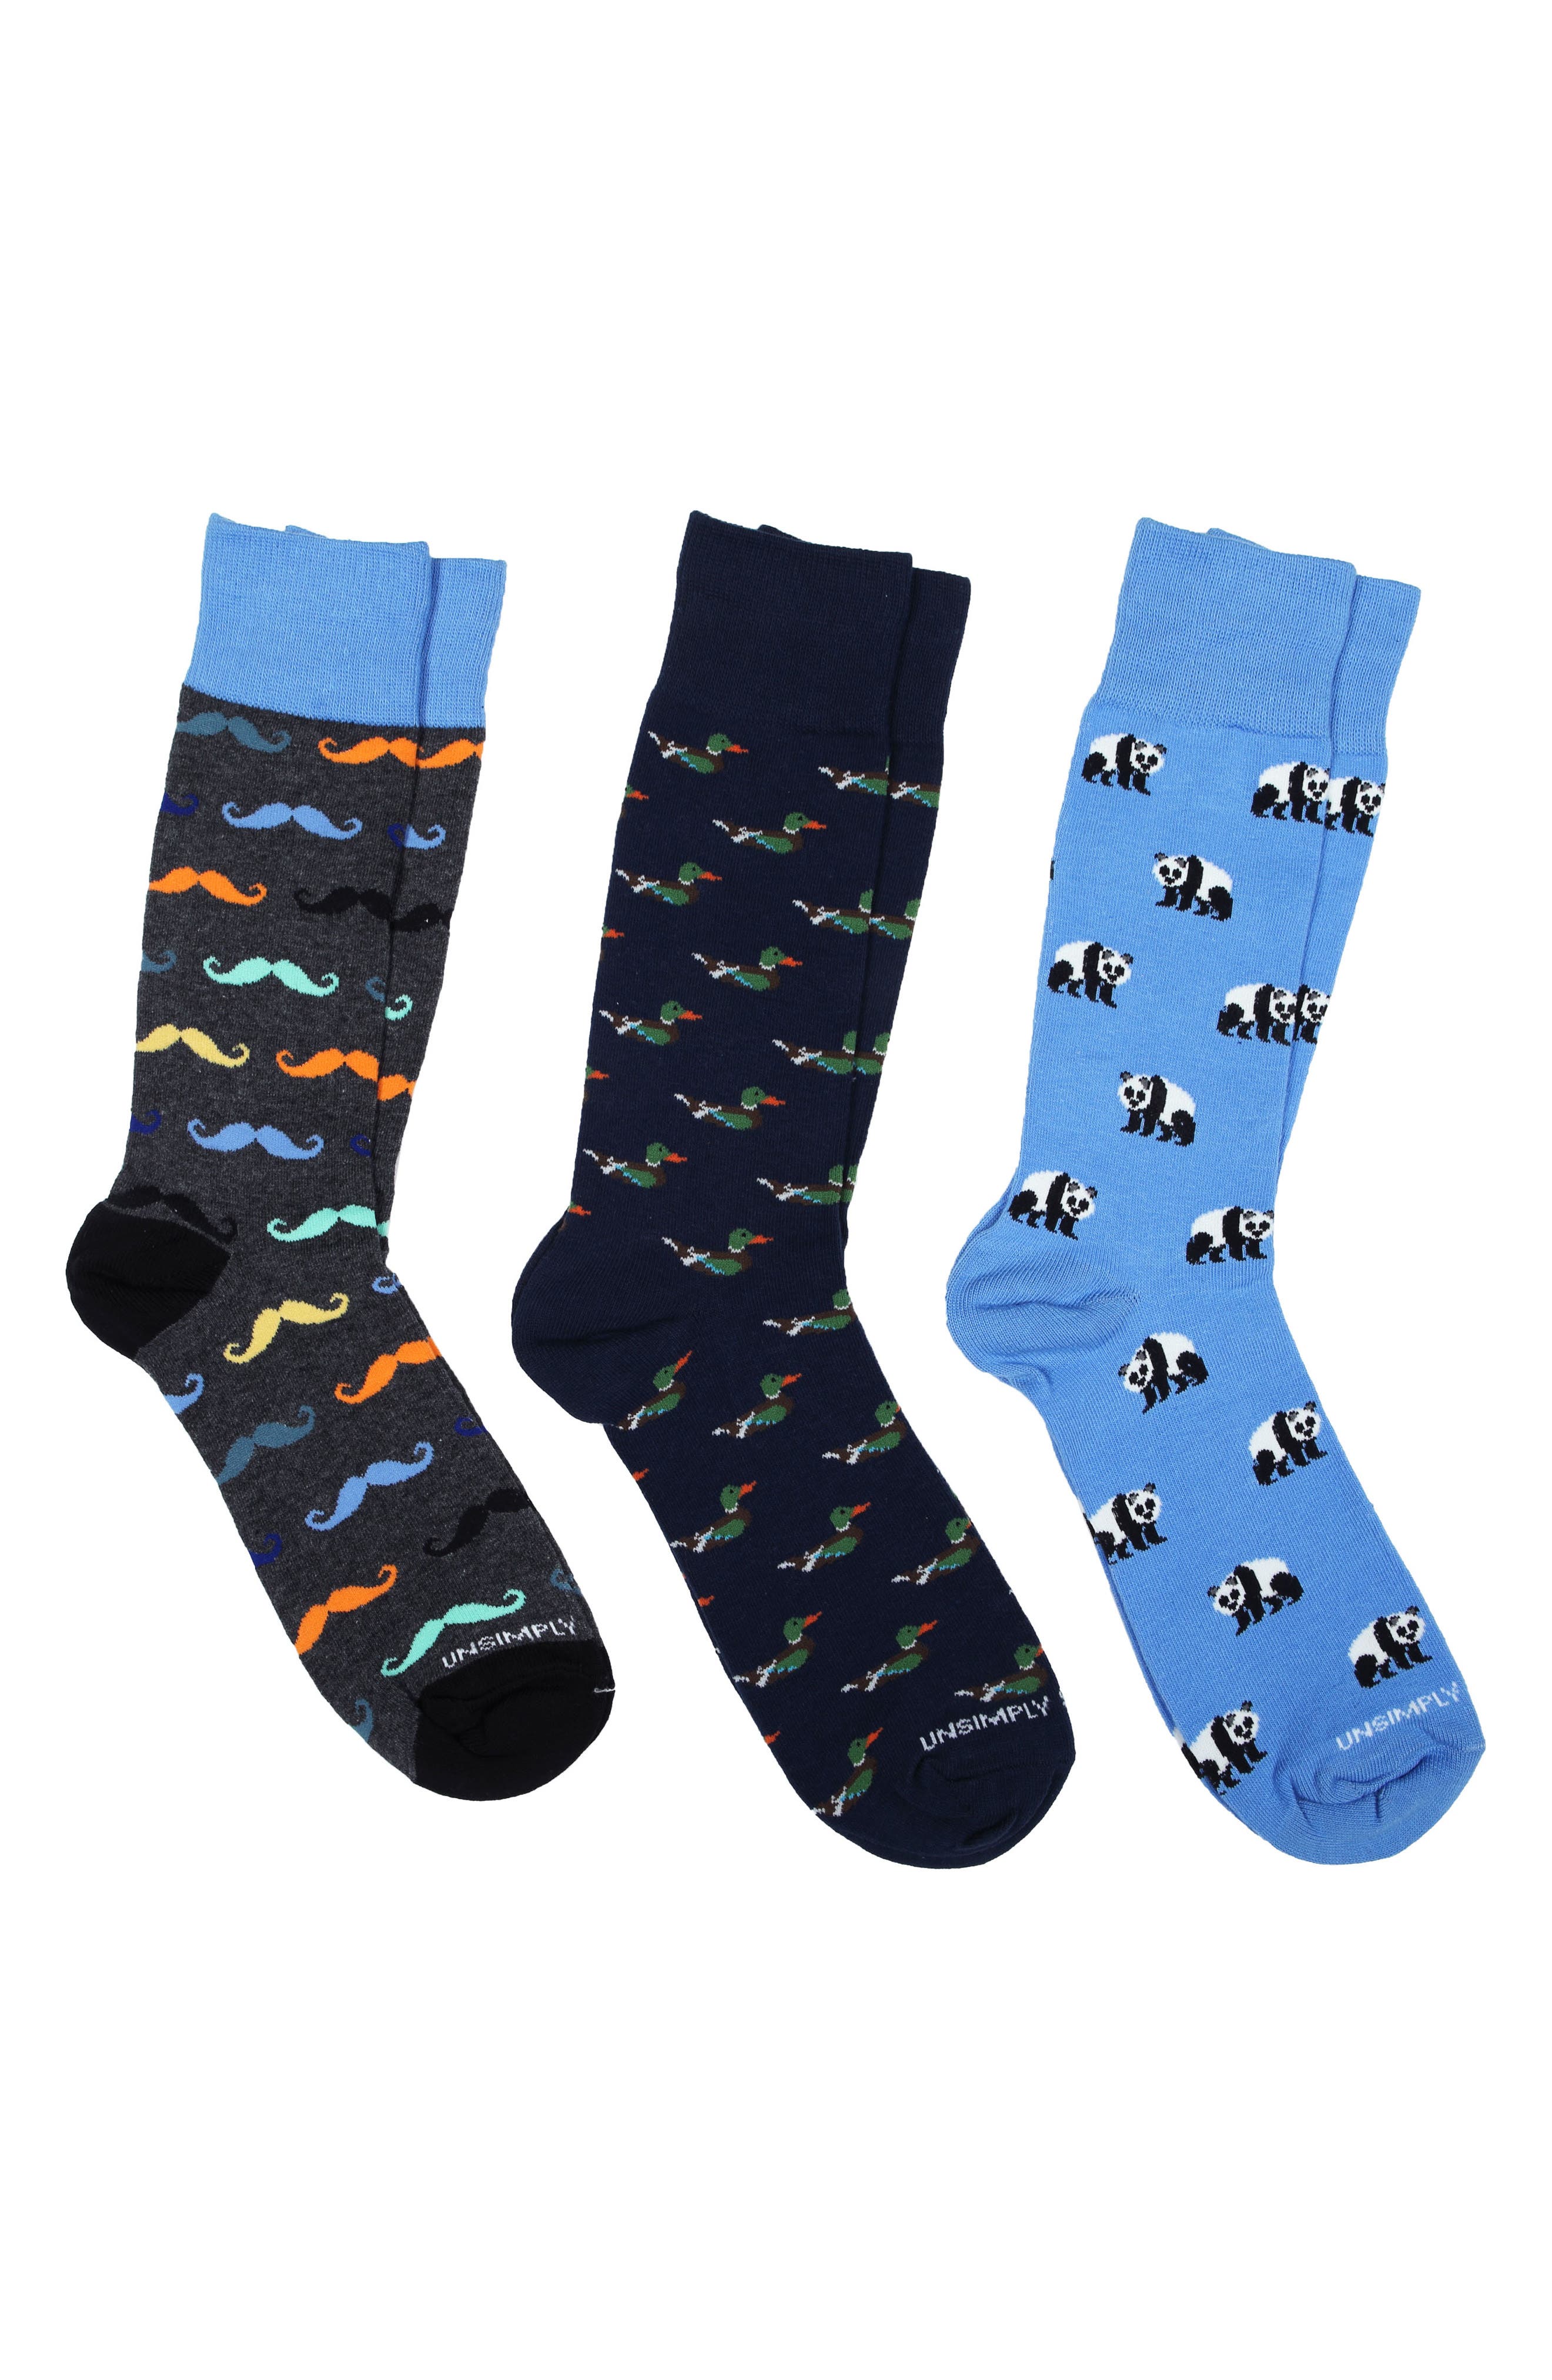 Assorted Pack of 4 Unsimply Stitched Socks 